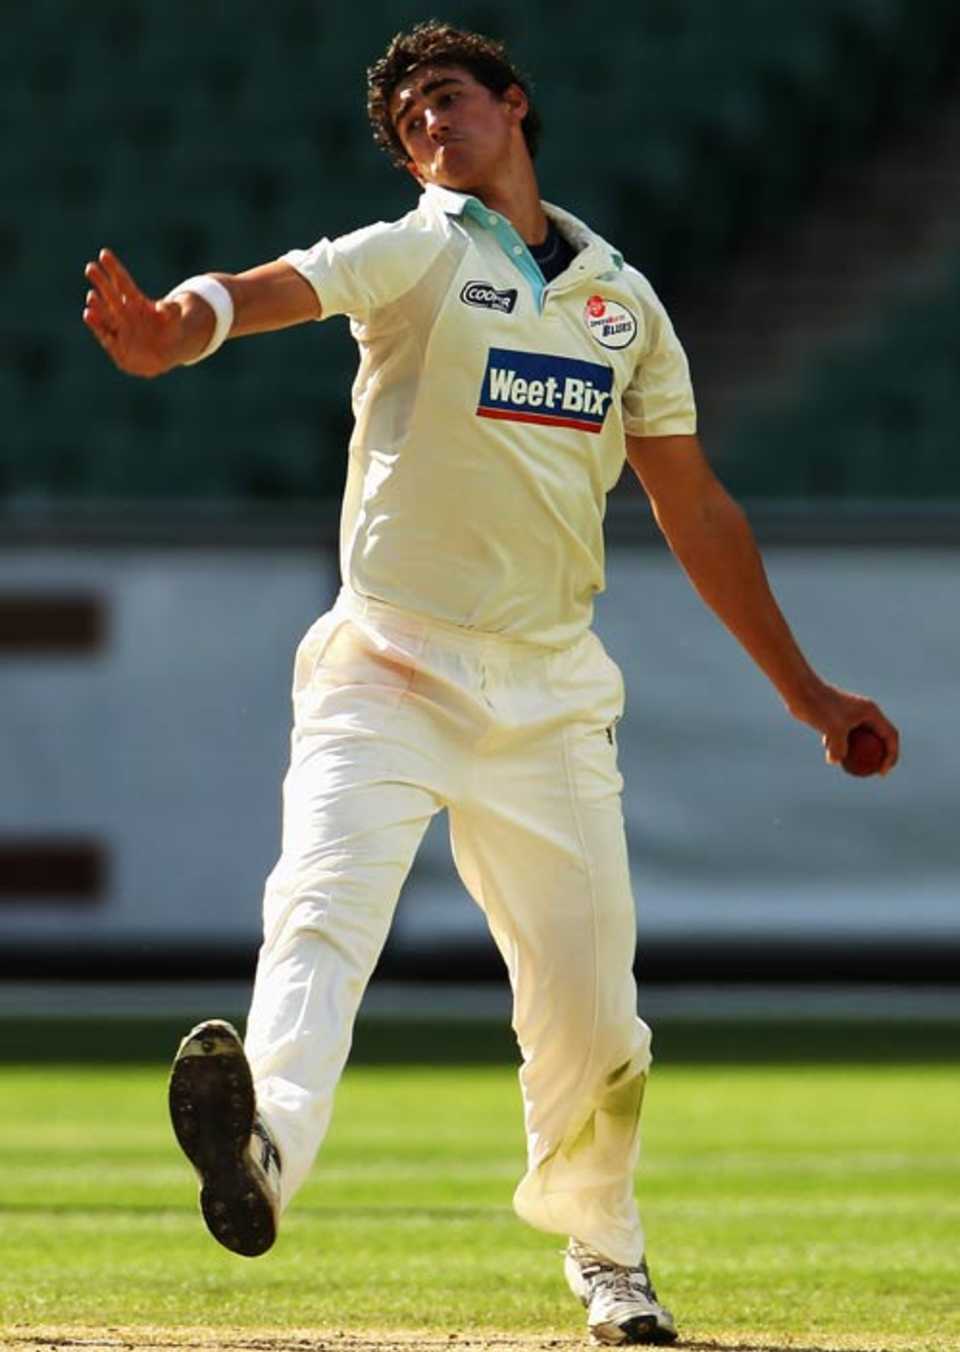 Mitchell Starc sends down a delivery